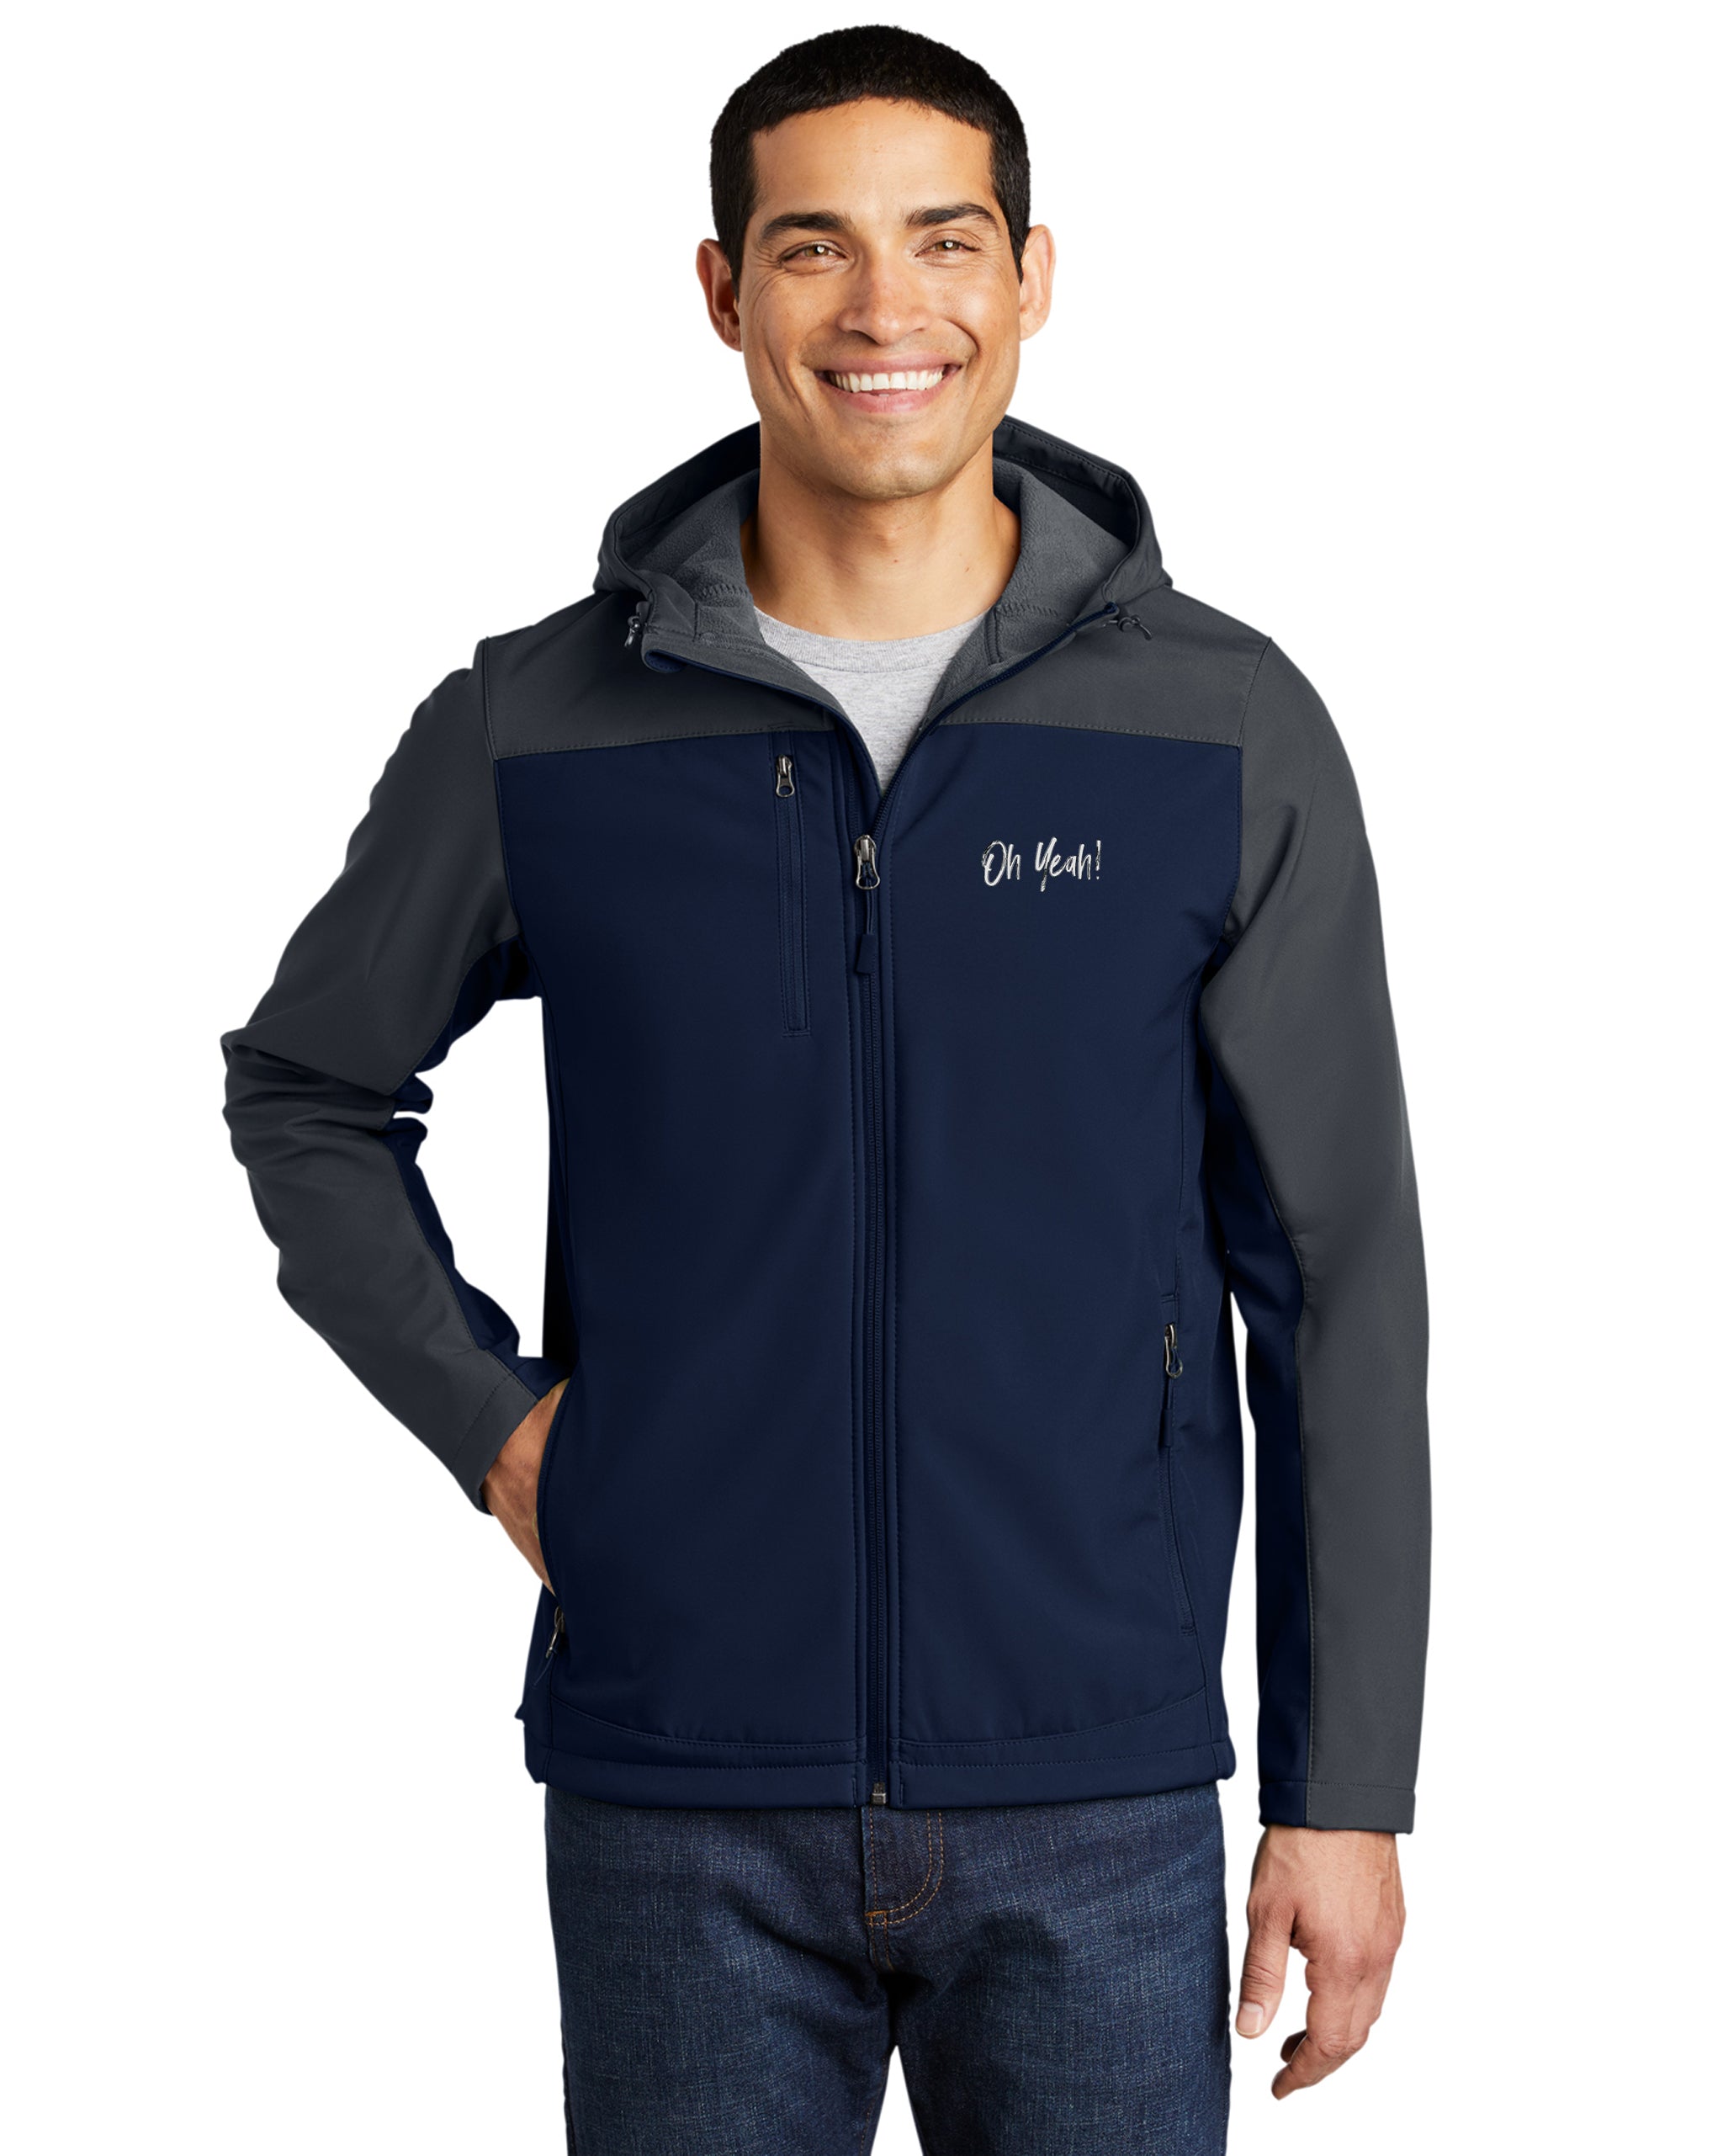 Oh Yeah - Port Authority Hooded Core Soft Shell Jacket - J335